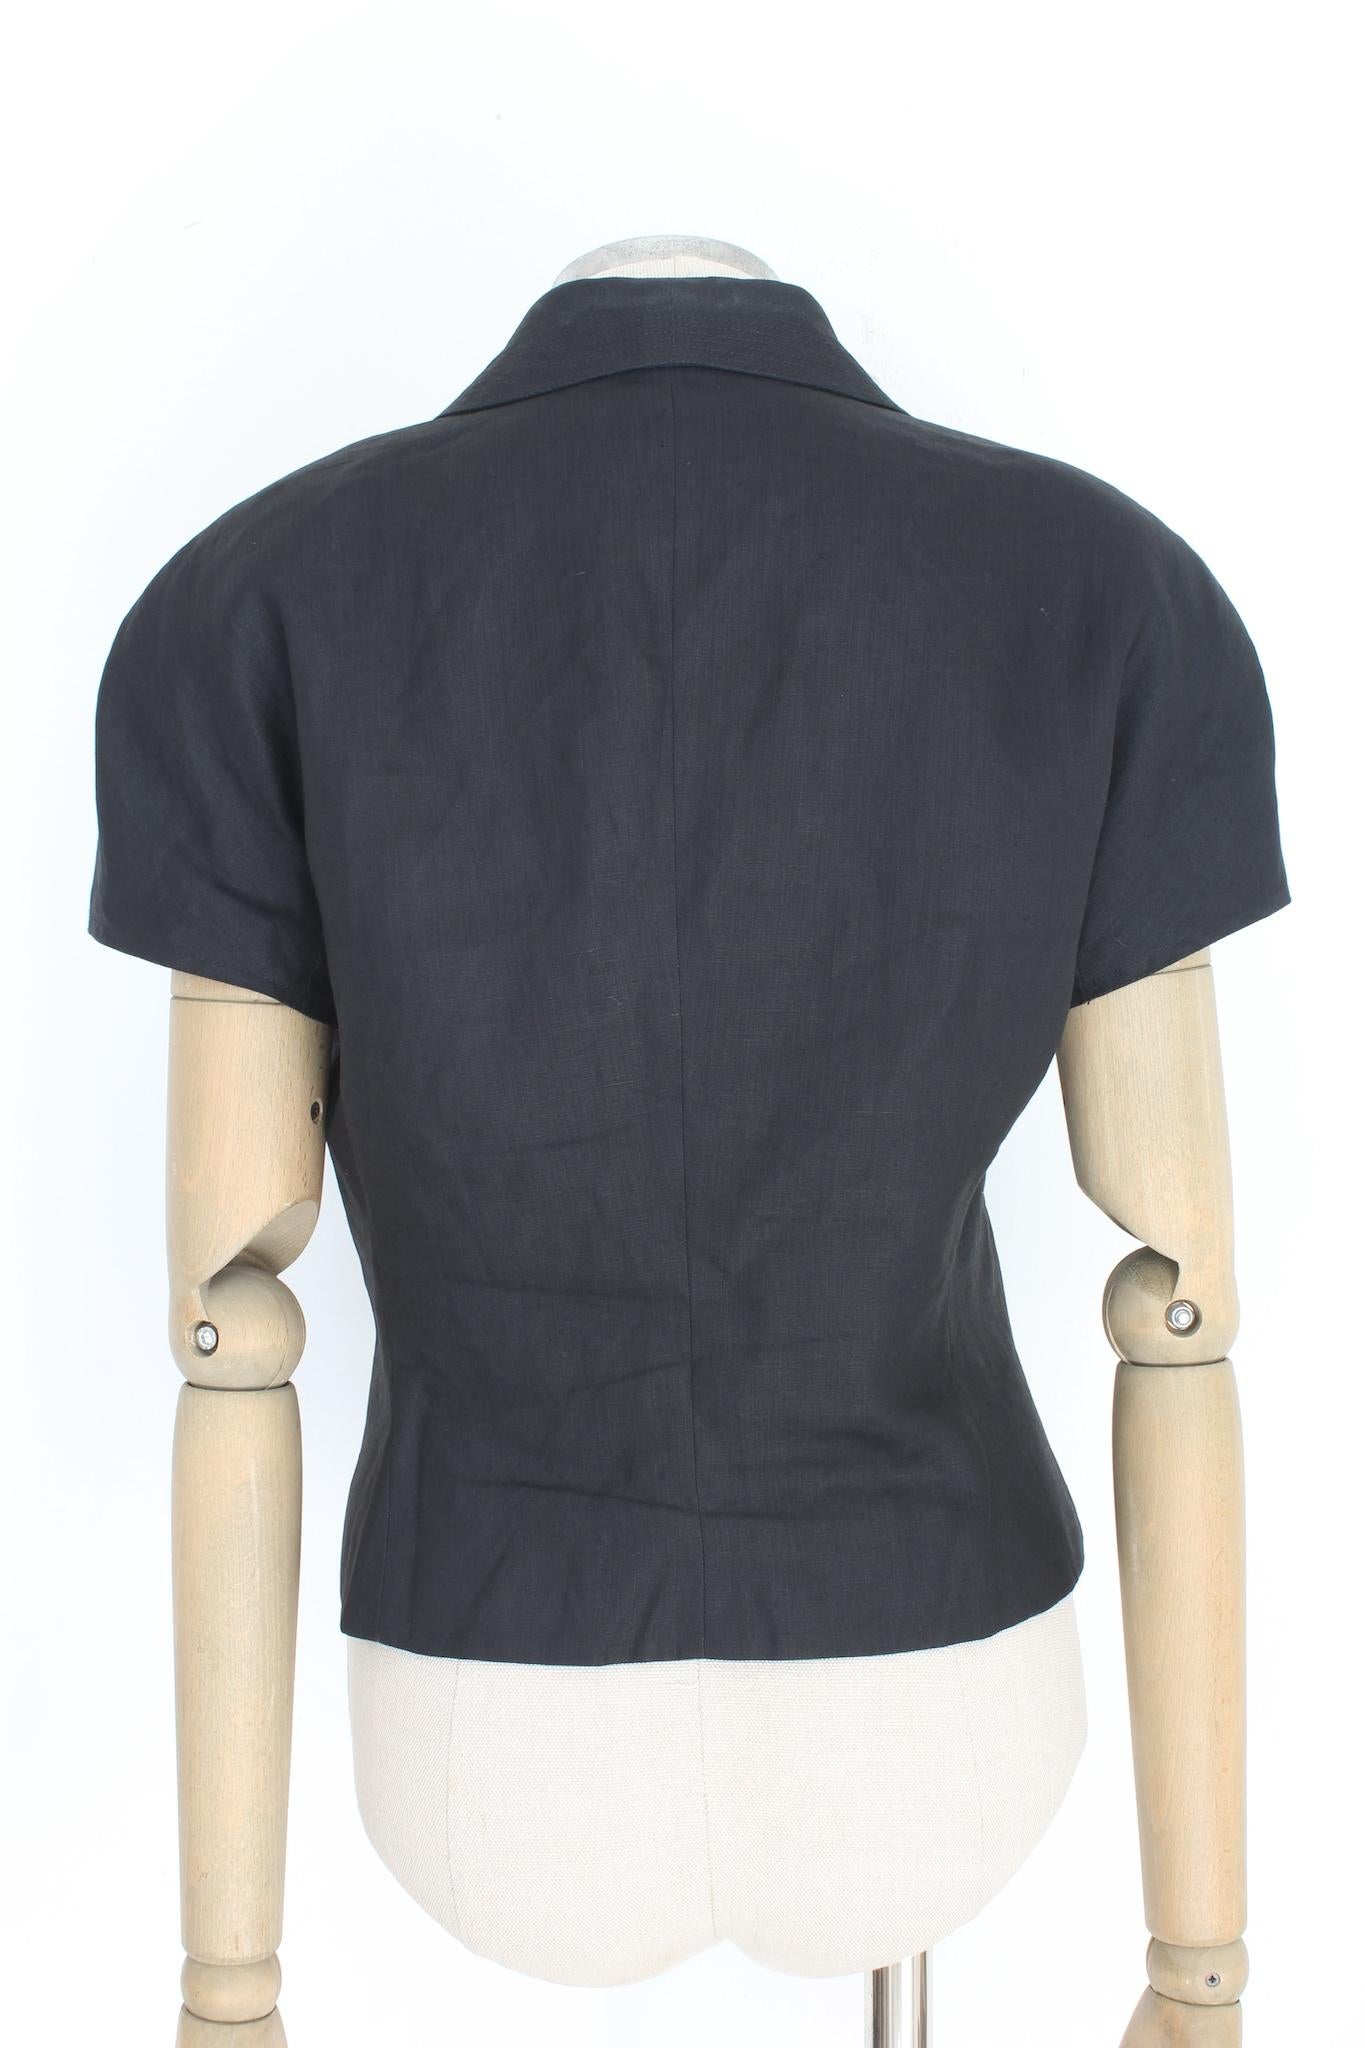 Versus by Gianni Versace 90s vintage short jacket. Short sleeve bolero, black colour. Stitching along the reverse, closure with jewel buttons, 100% linen fabric, internally lined. Made in Italy.

Size 44 It 10 Us 12 Uk

Shoulder: 44 cm
Bust/Chest: